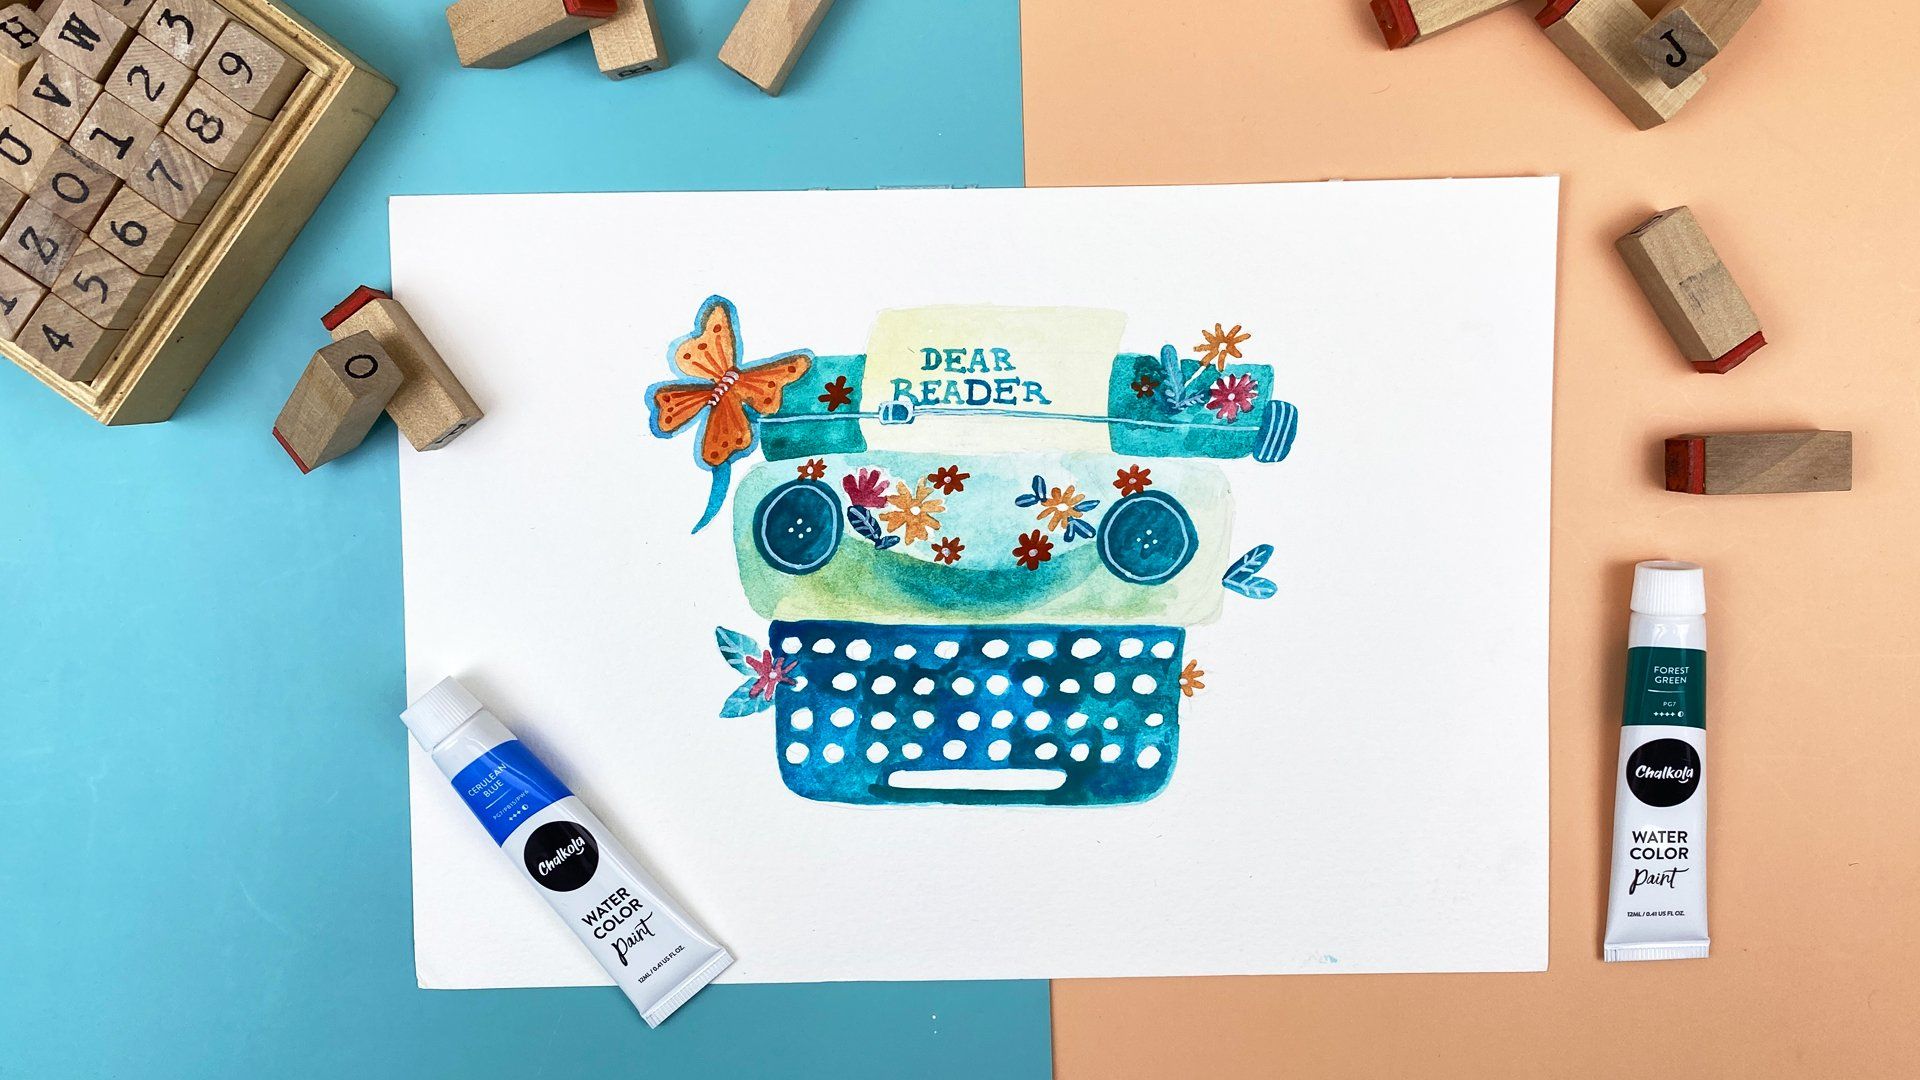 How to Paint a Typewriter Using Watercolor